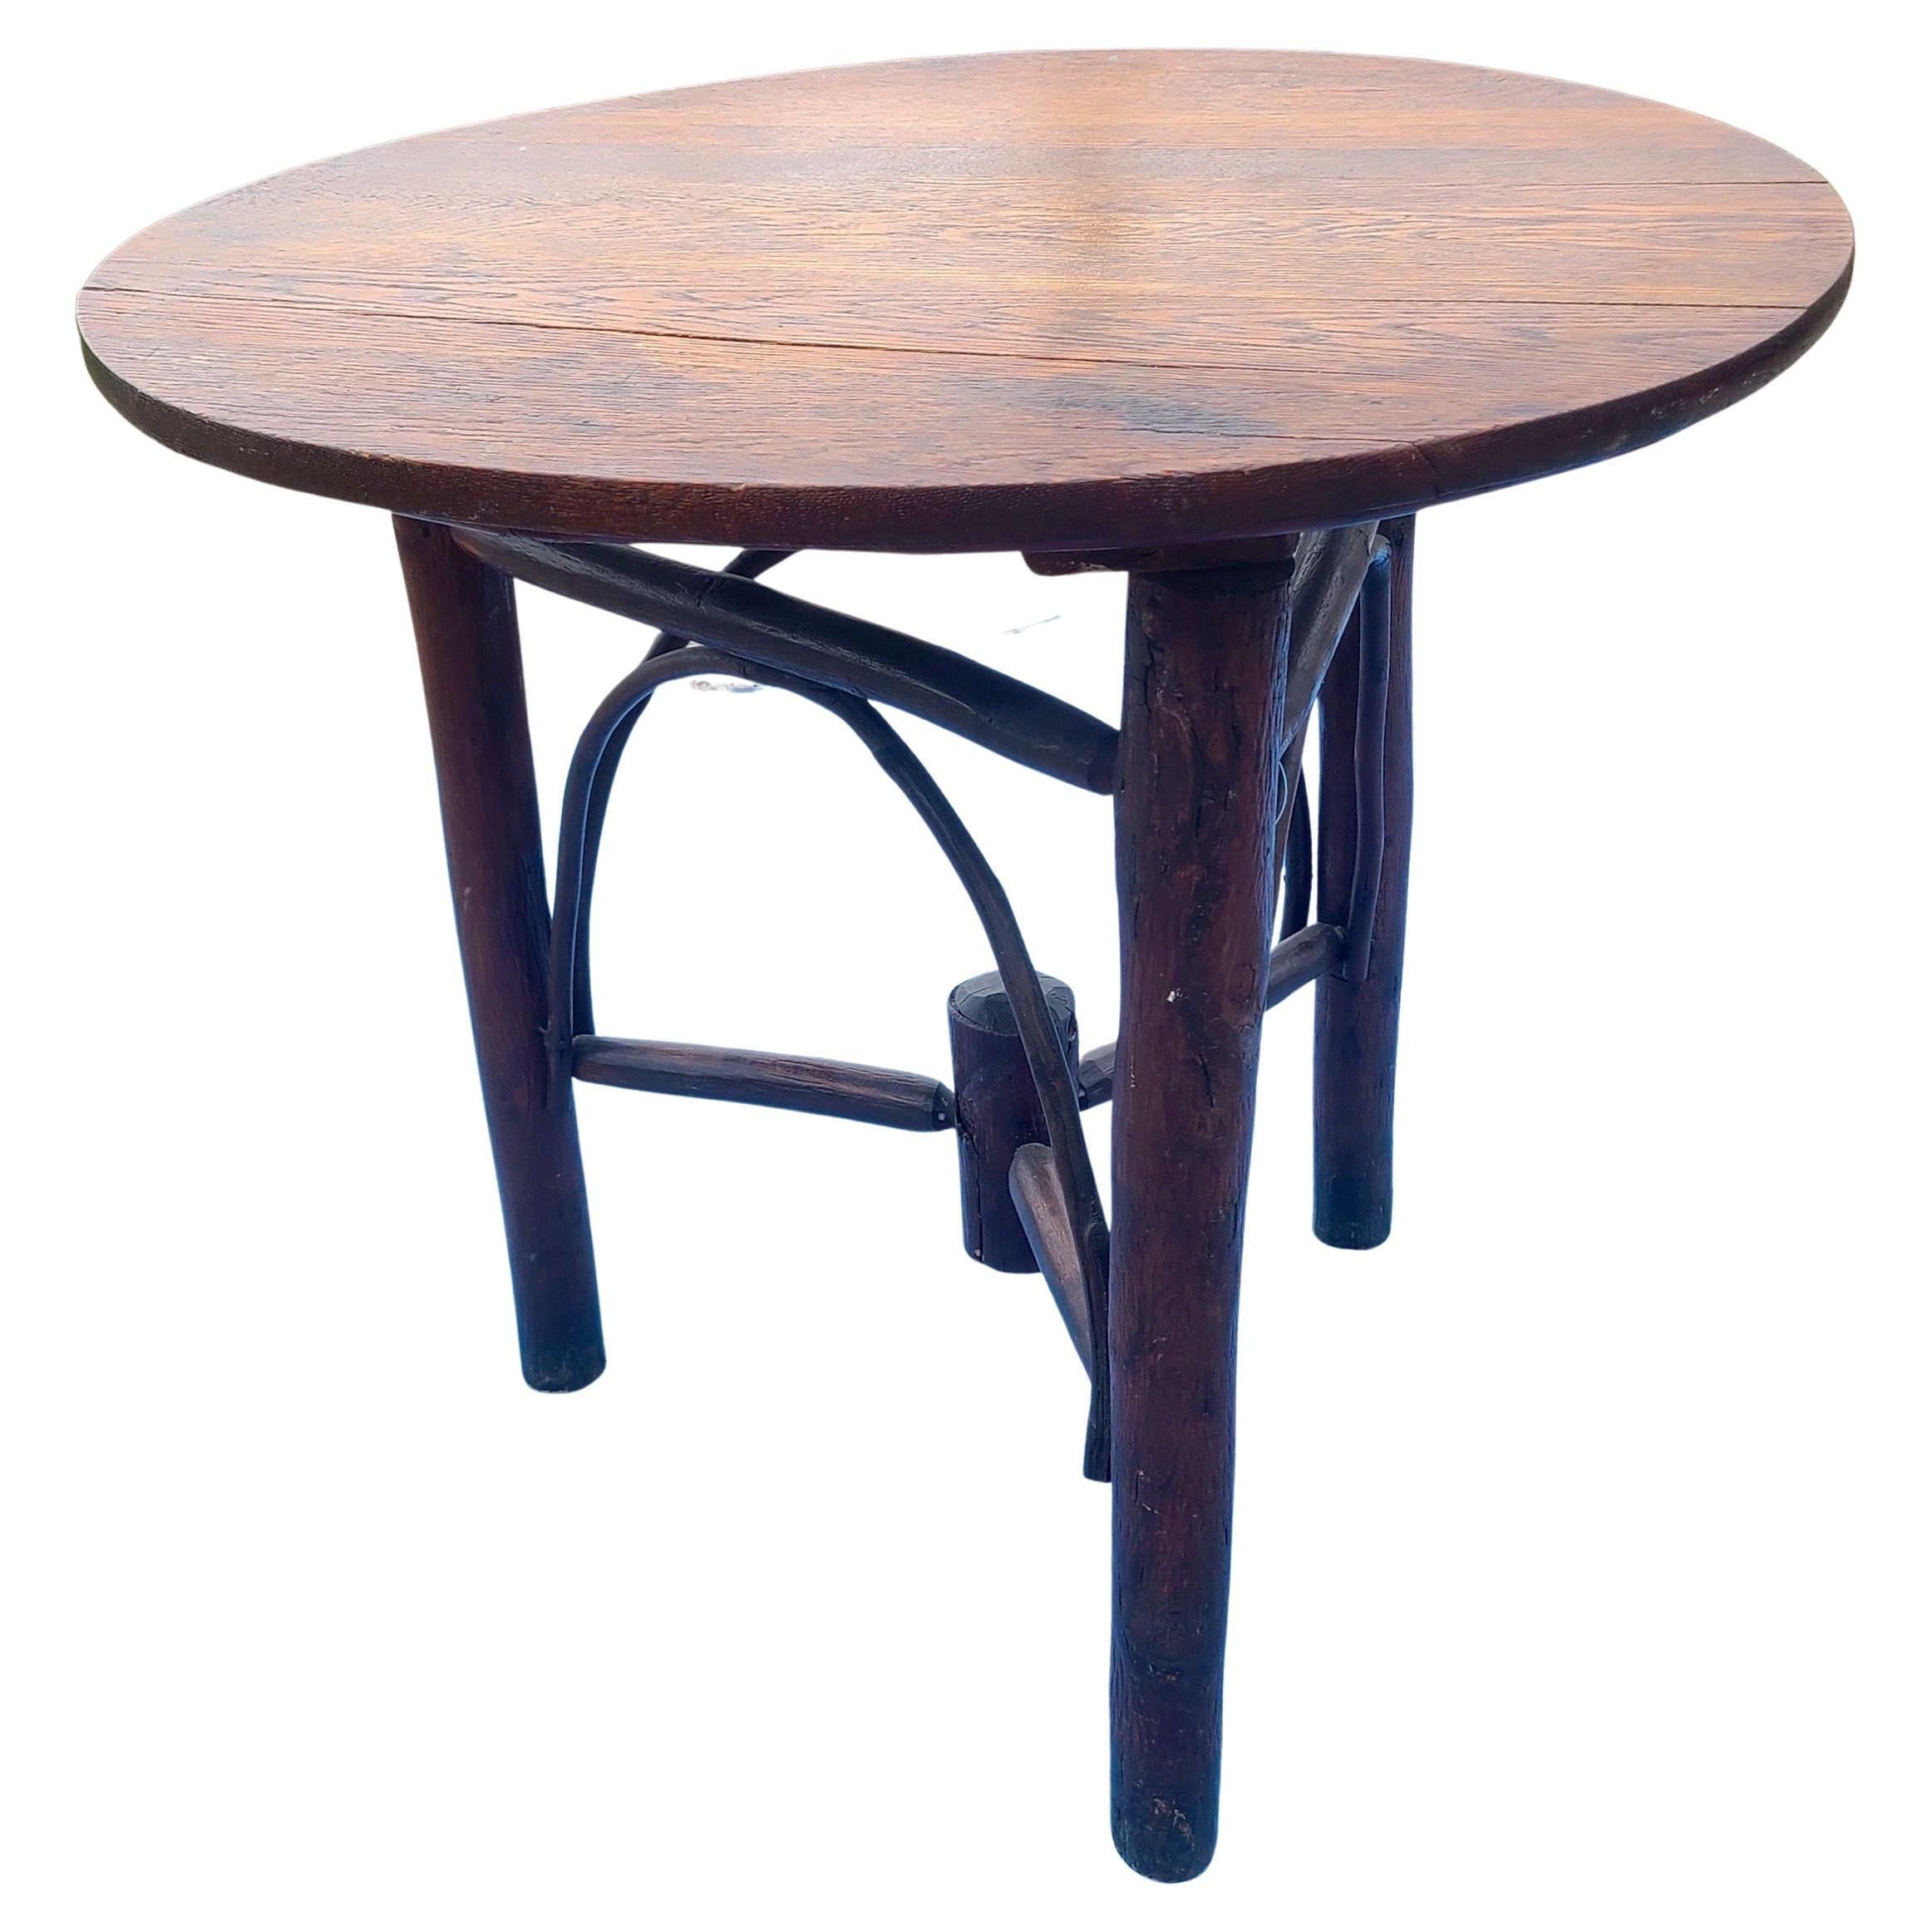 Mid-20th Century Tavern Table by Old Hickory Arts & Crafts Mission